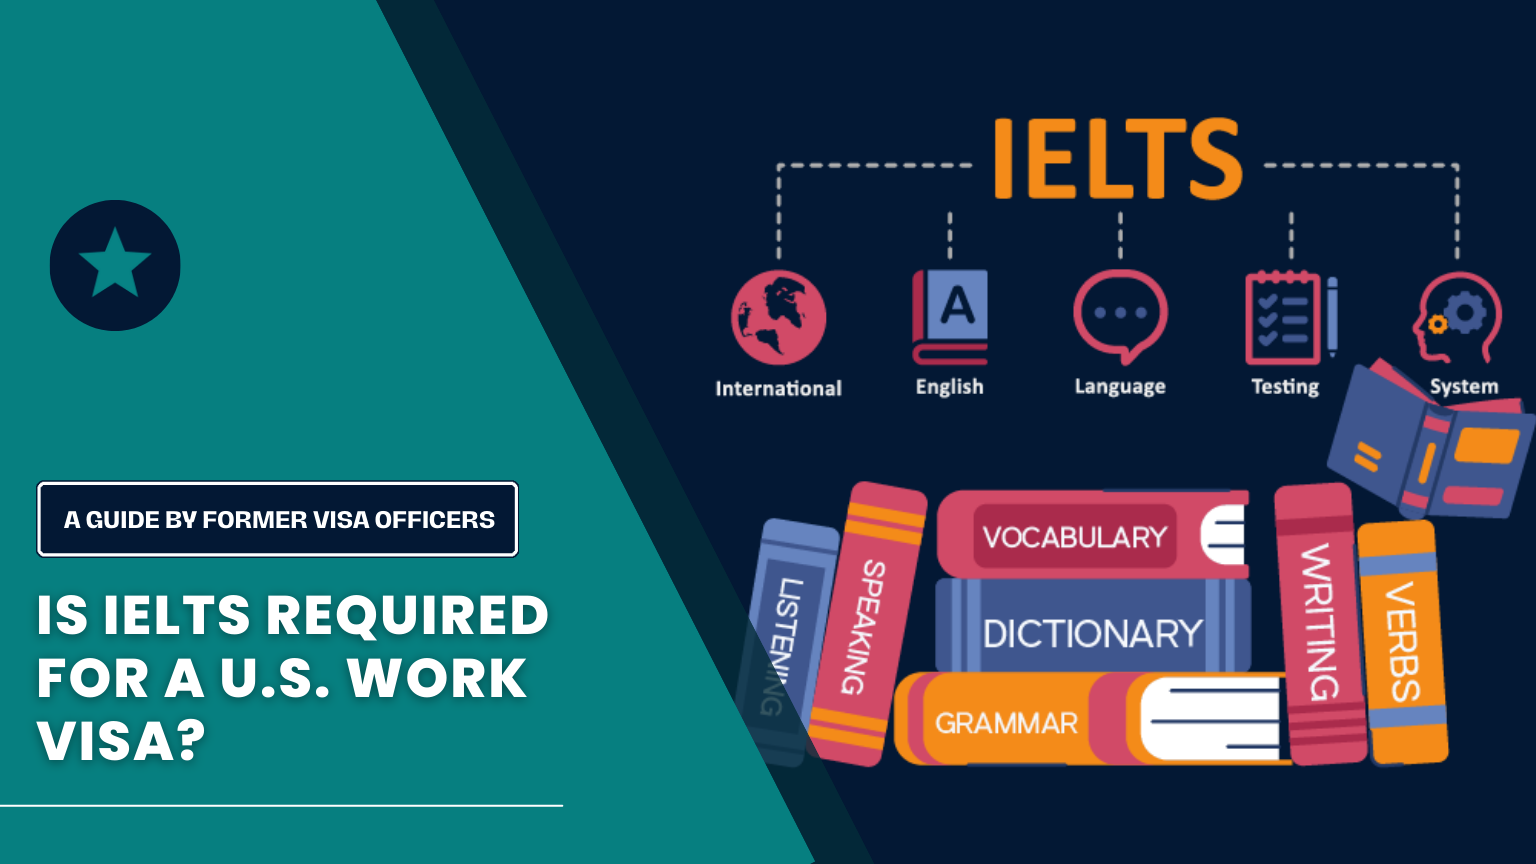 Is IELTS Required for a U.S. Work Visa